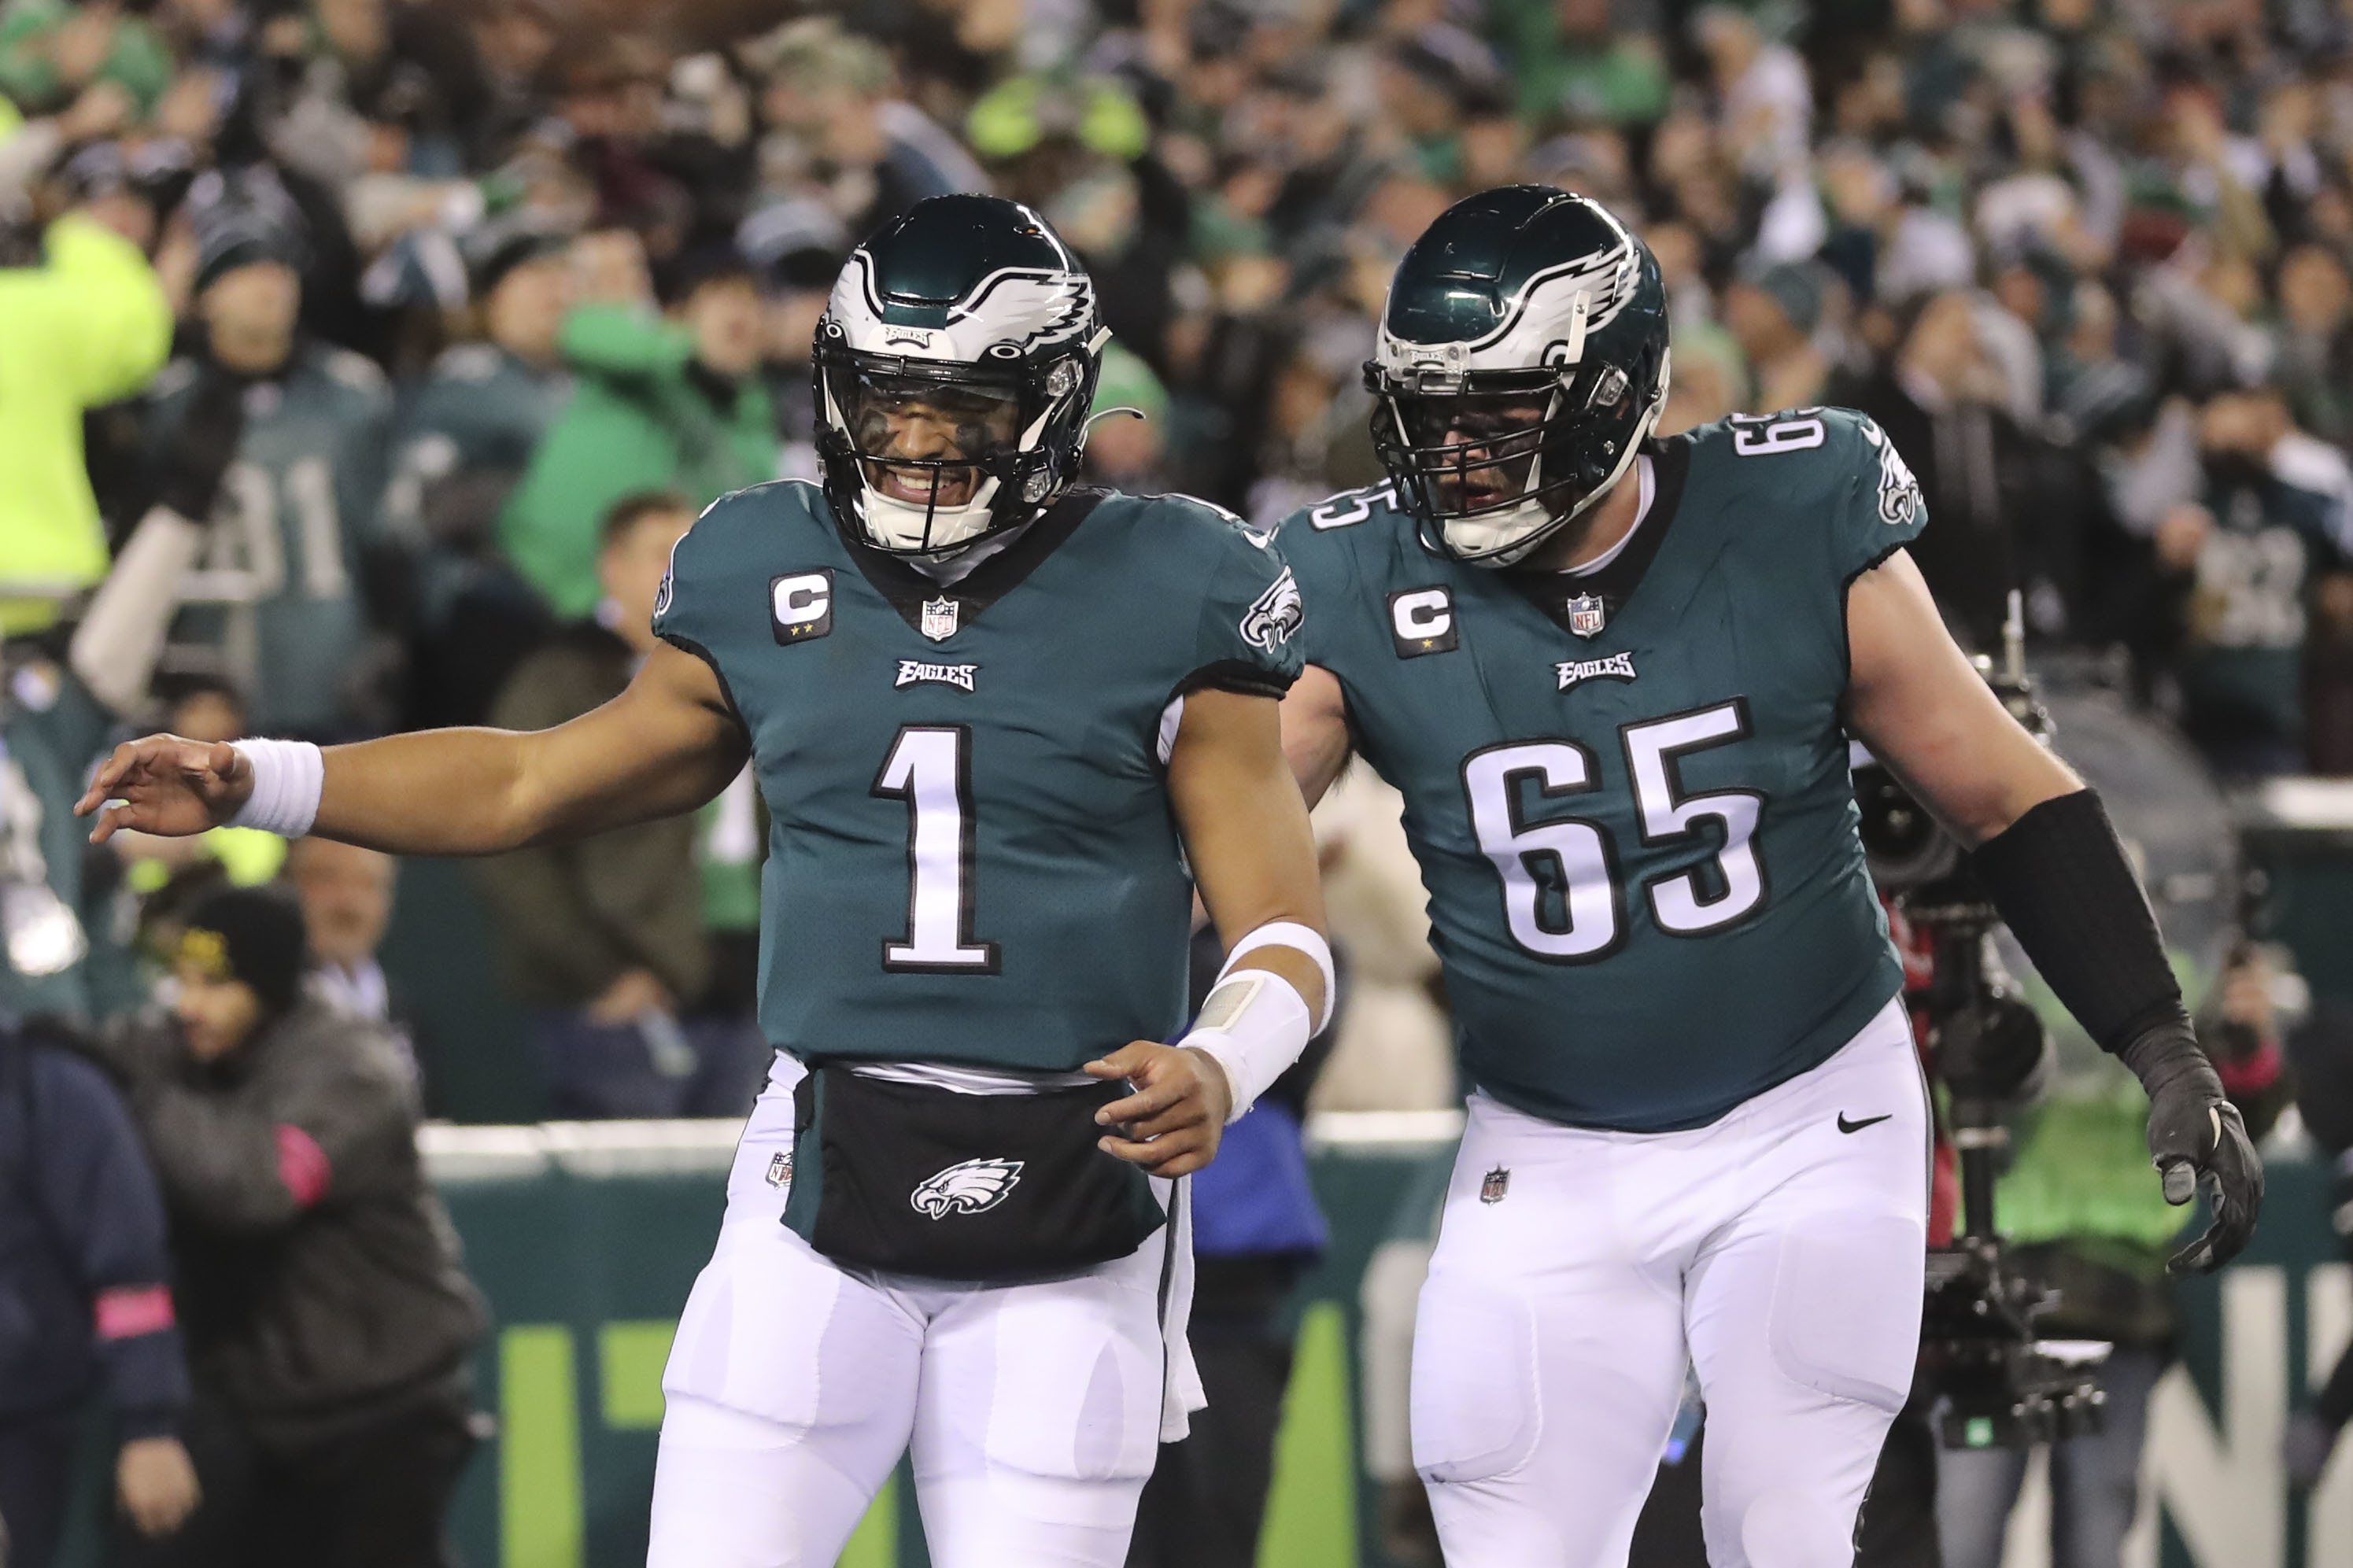 Full highlights and analysis of Eagles' NFC Championship rout of